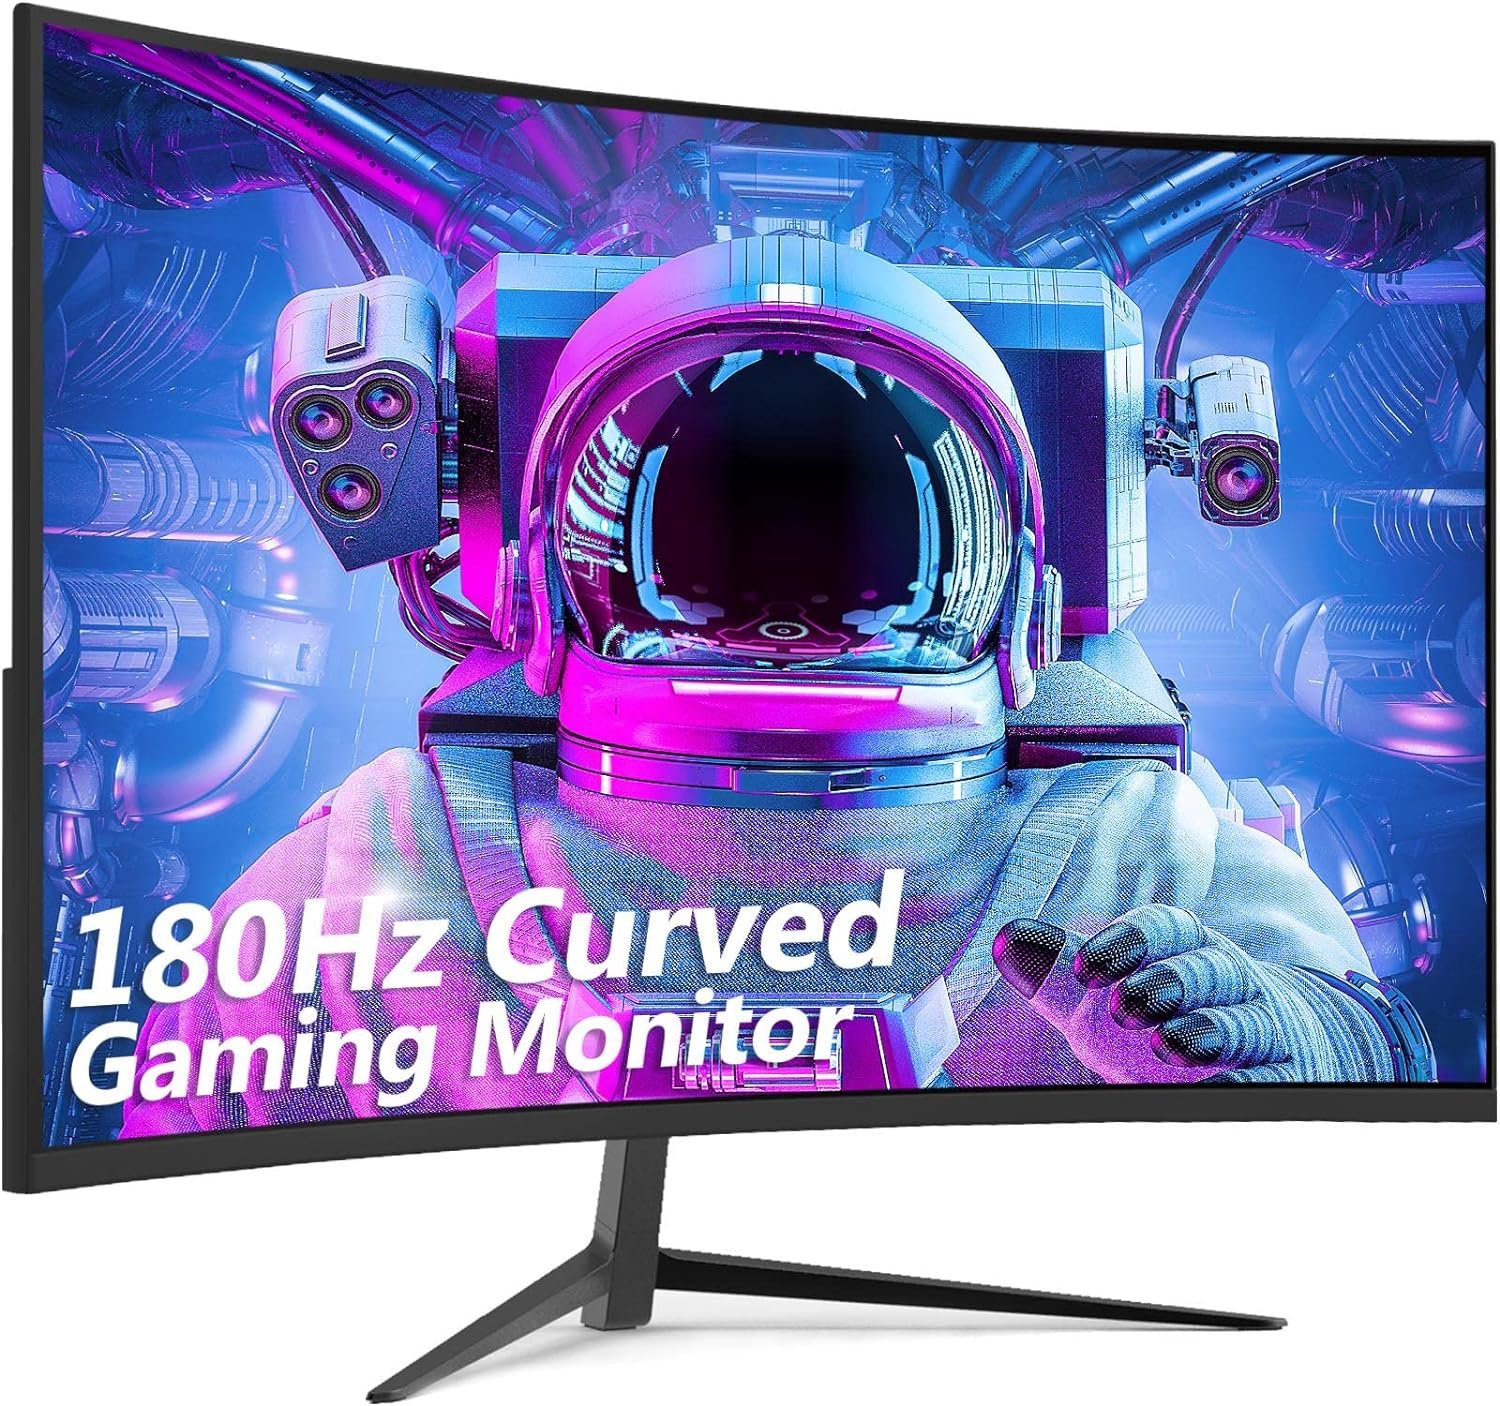 Z-Edge 24-inch Curved Gaming Monitor